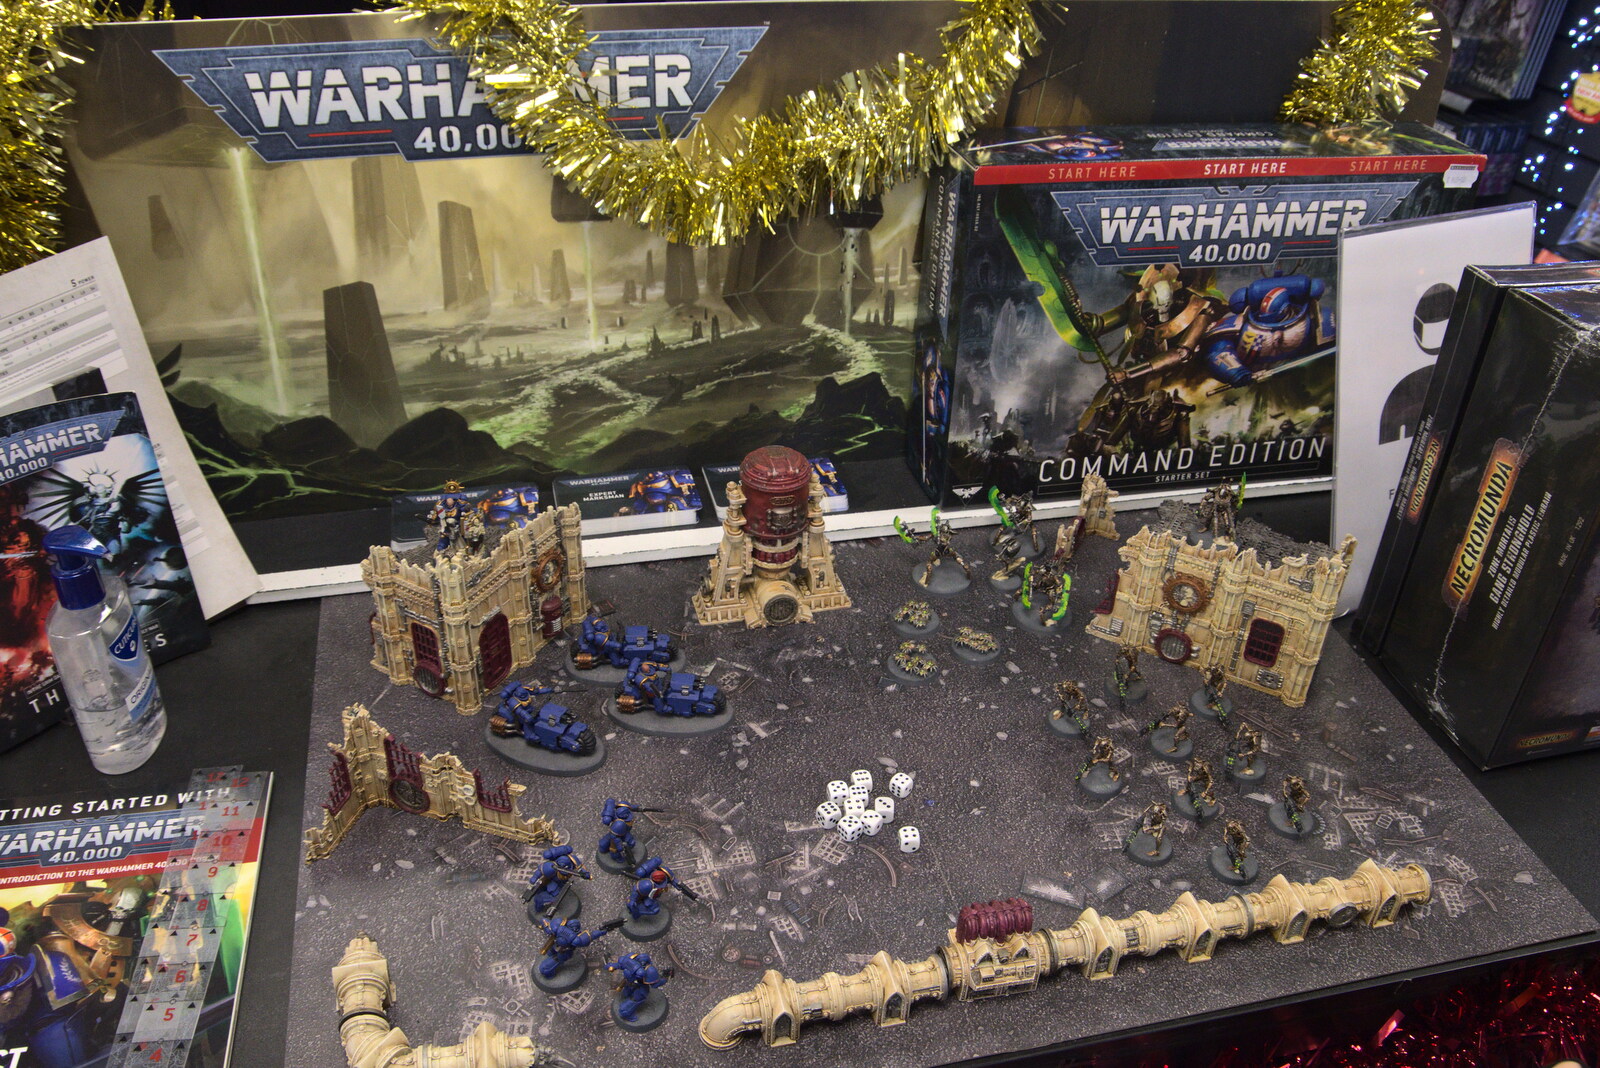 Harry has a look in Warhammer 40,000 from Scooters and a Bit of Christmas Shopping, Eye and Norwich, Norfolk - 23rd December 2021